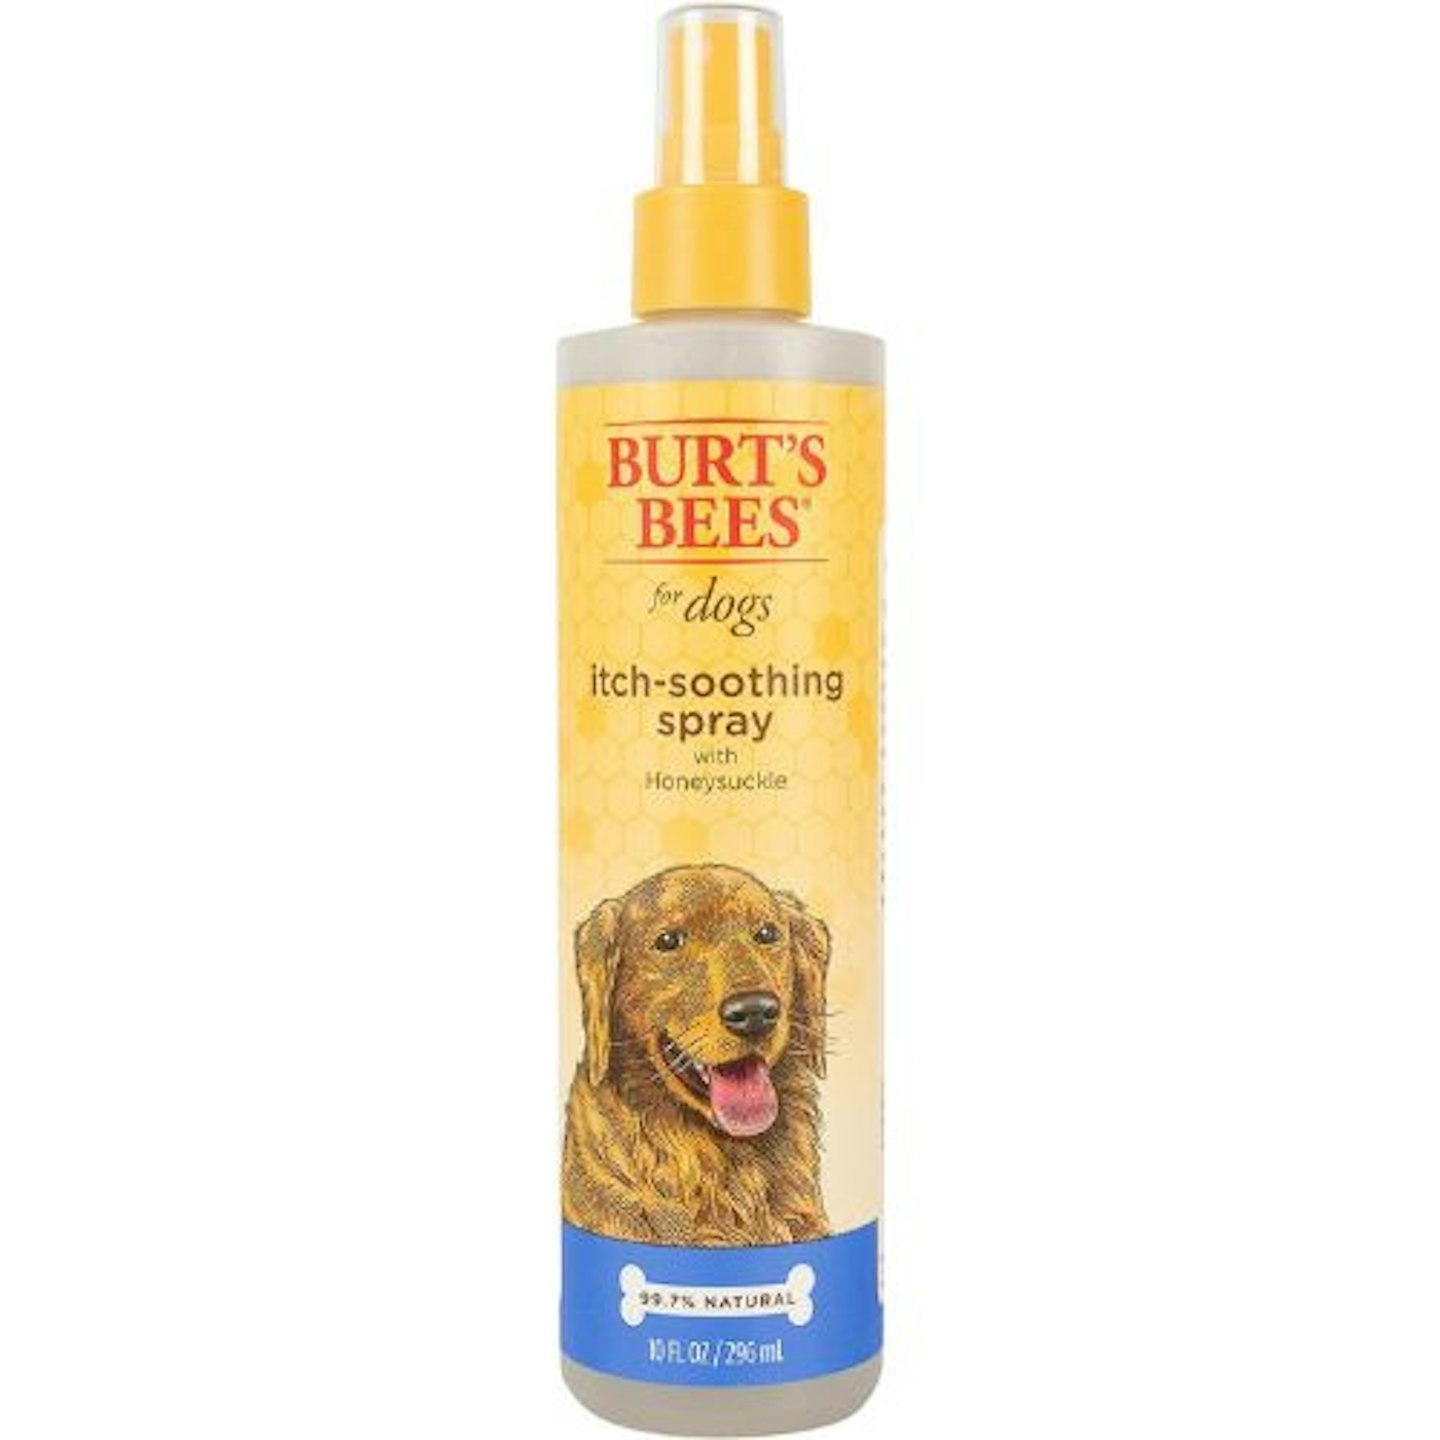 Burt's Bees for Dogs Natural Itch Soothing Spray